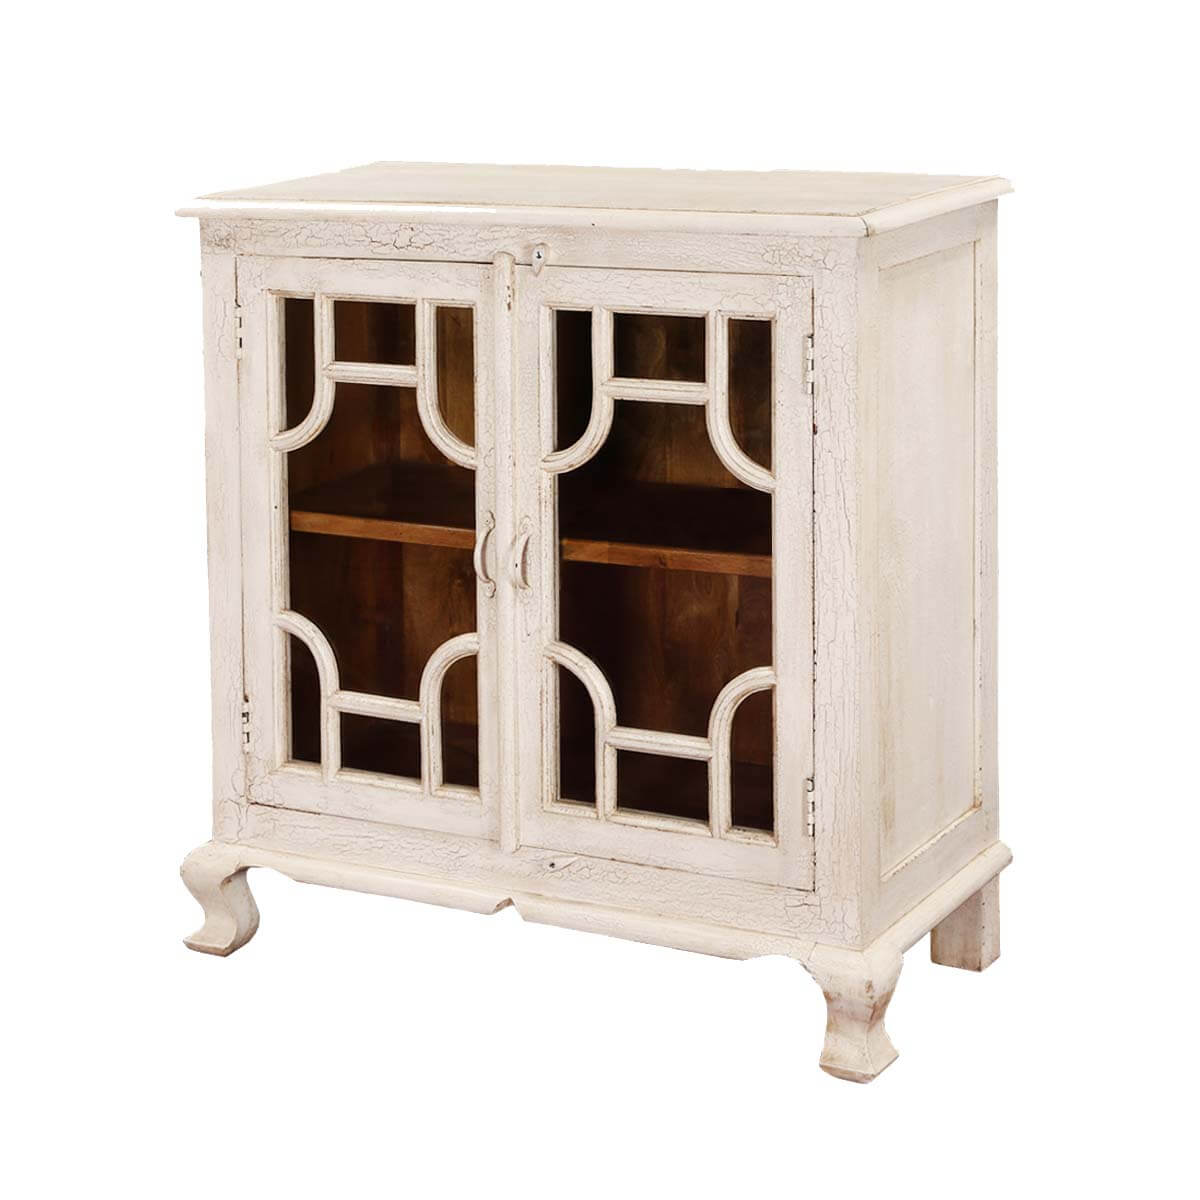 new orleans traditional white glass door rustic accent storage cabinet furniture tall thin table amish made end tables umbrella stand base and chairs garage cabinets dale tiffany